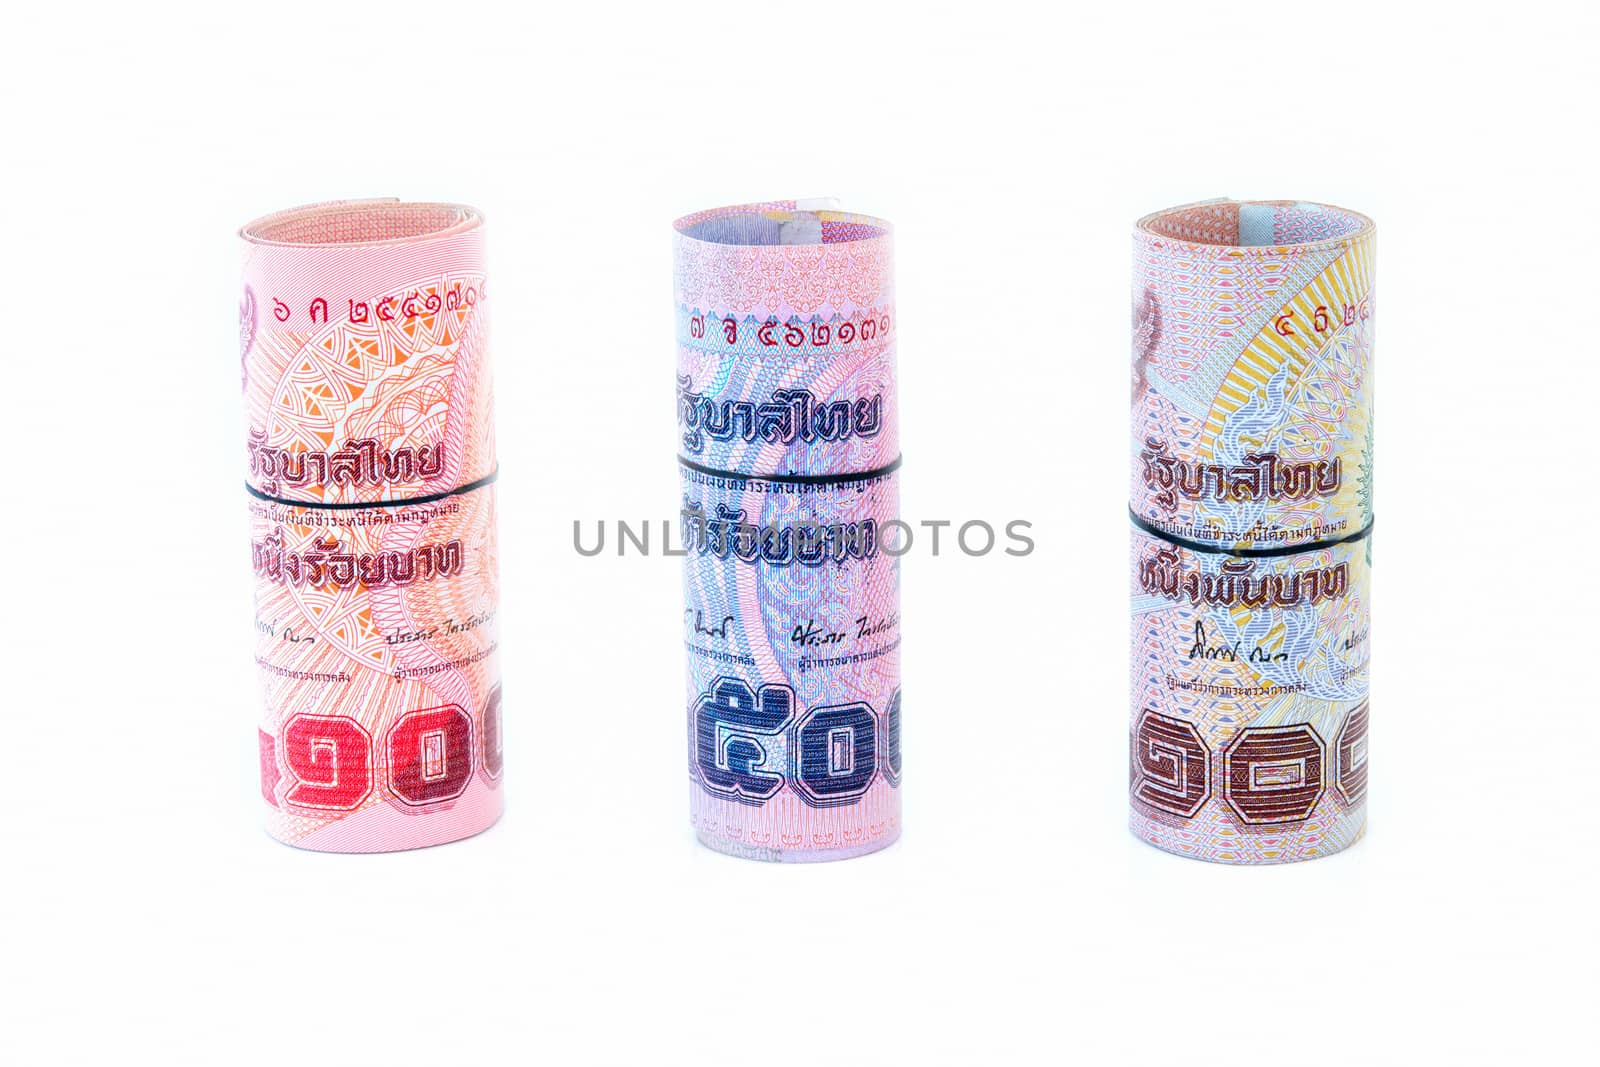 Rolls of bank Thai currency on white background